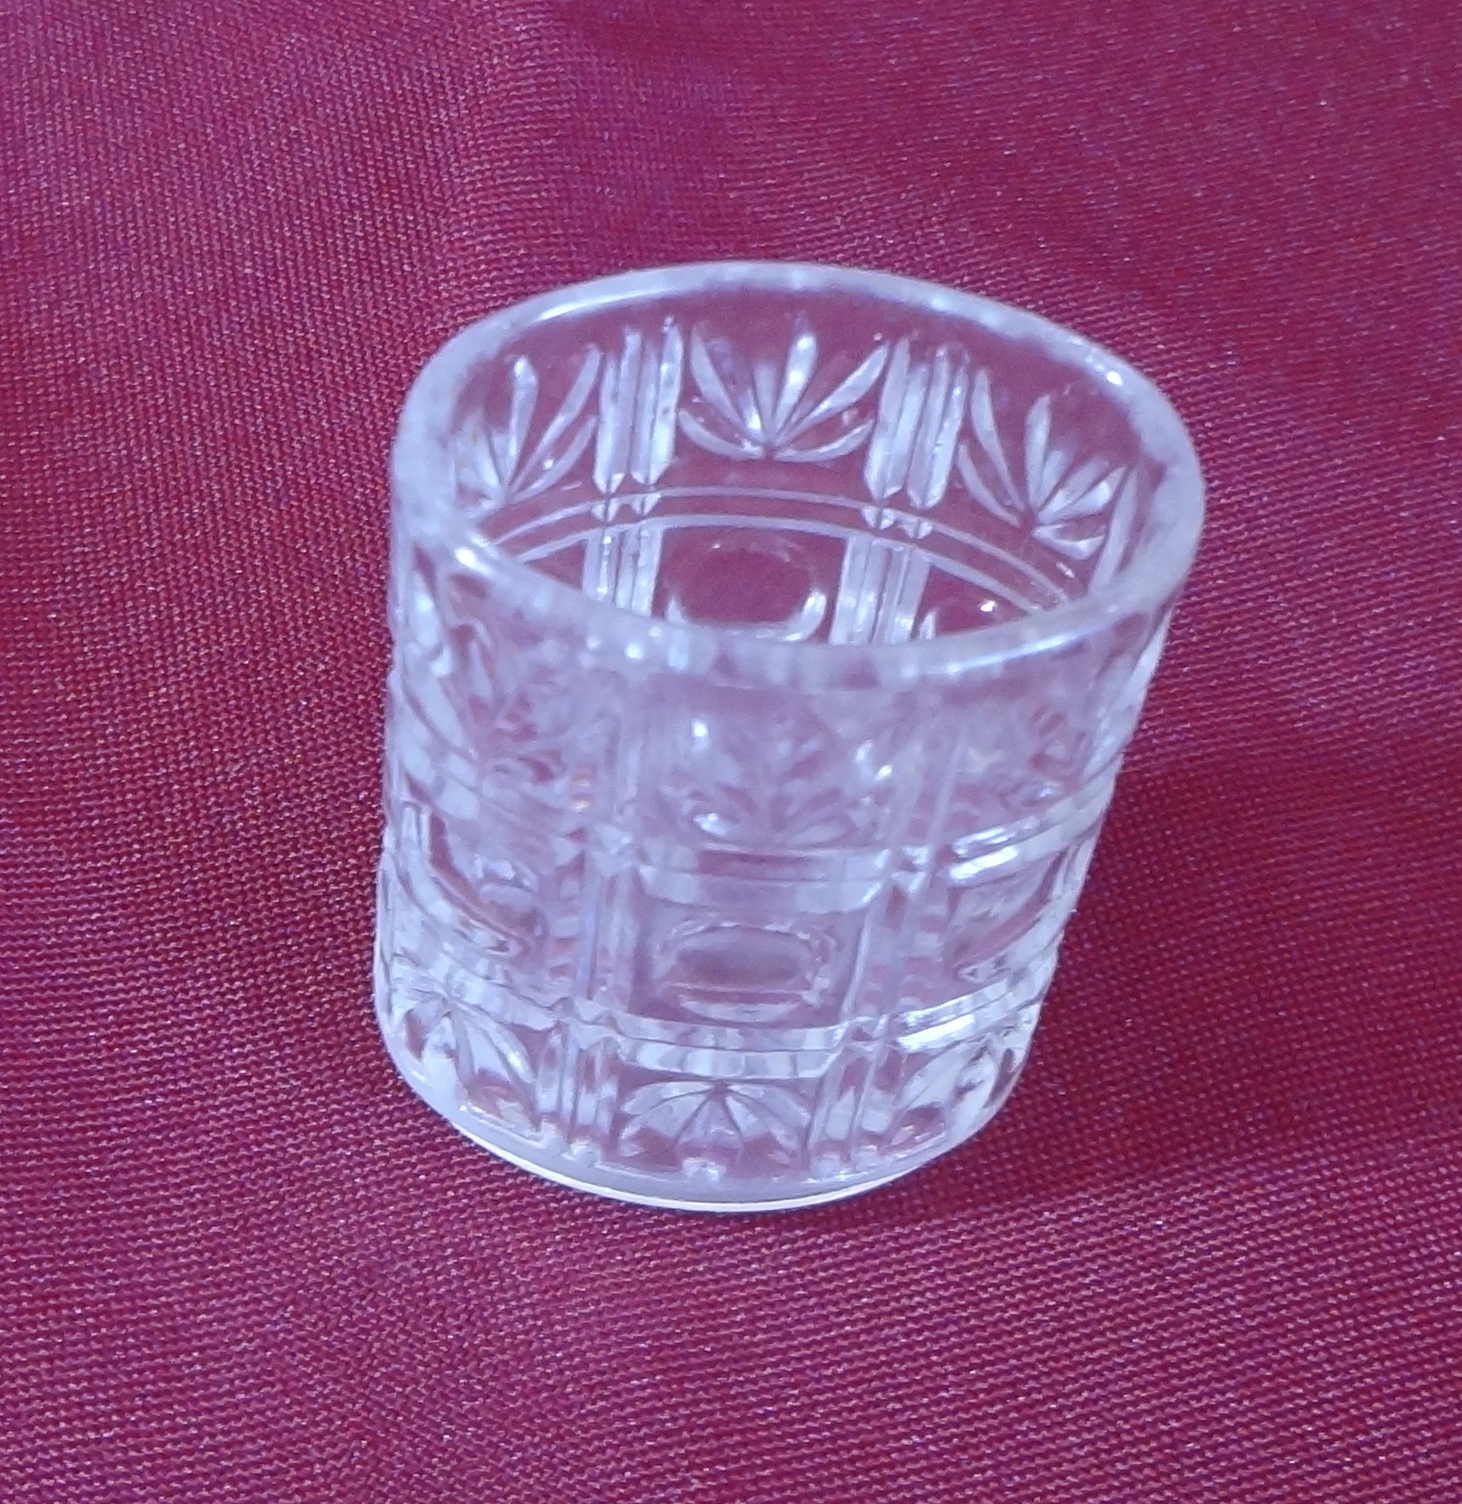 Plastic Toothpick Holder Faux Crystal Cut Glass Pattern - $1.99